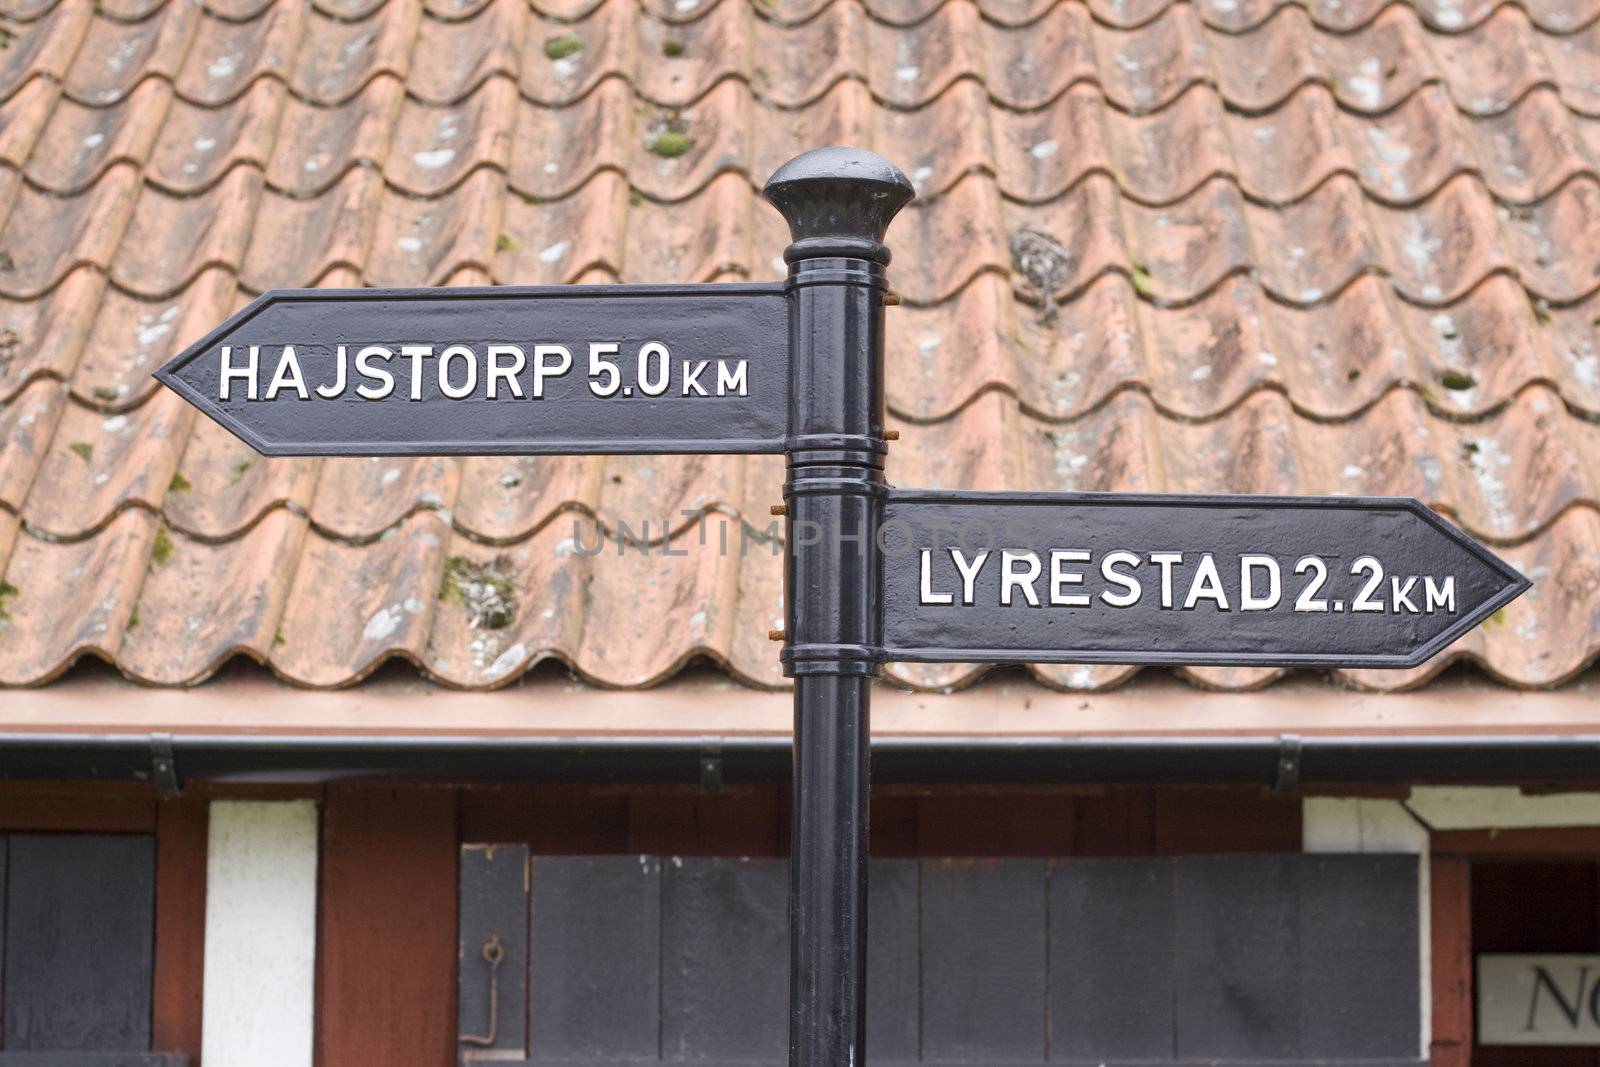 An old black cast iron sign shows direction next to Gota Canal, a canal that goes through the South of Sweden